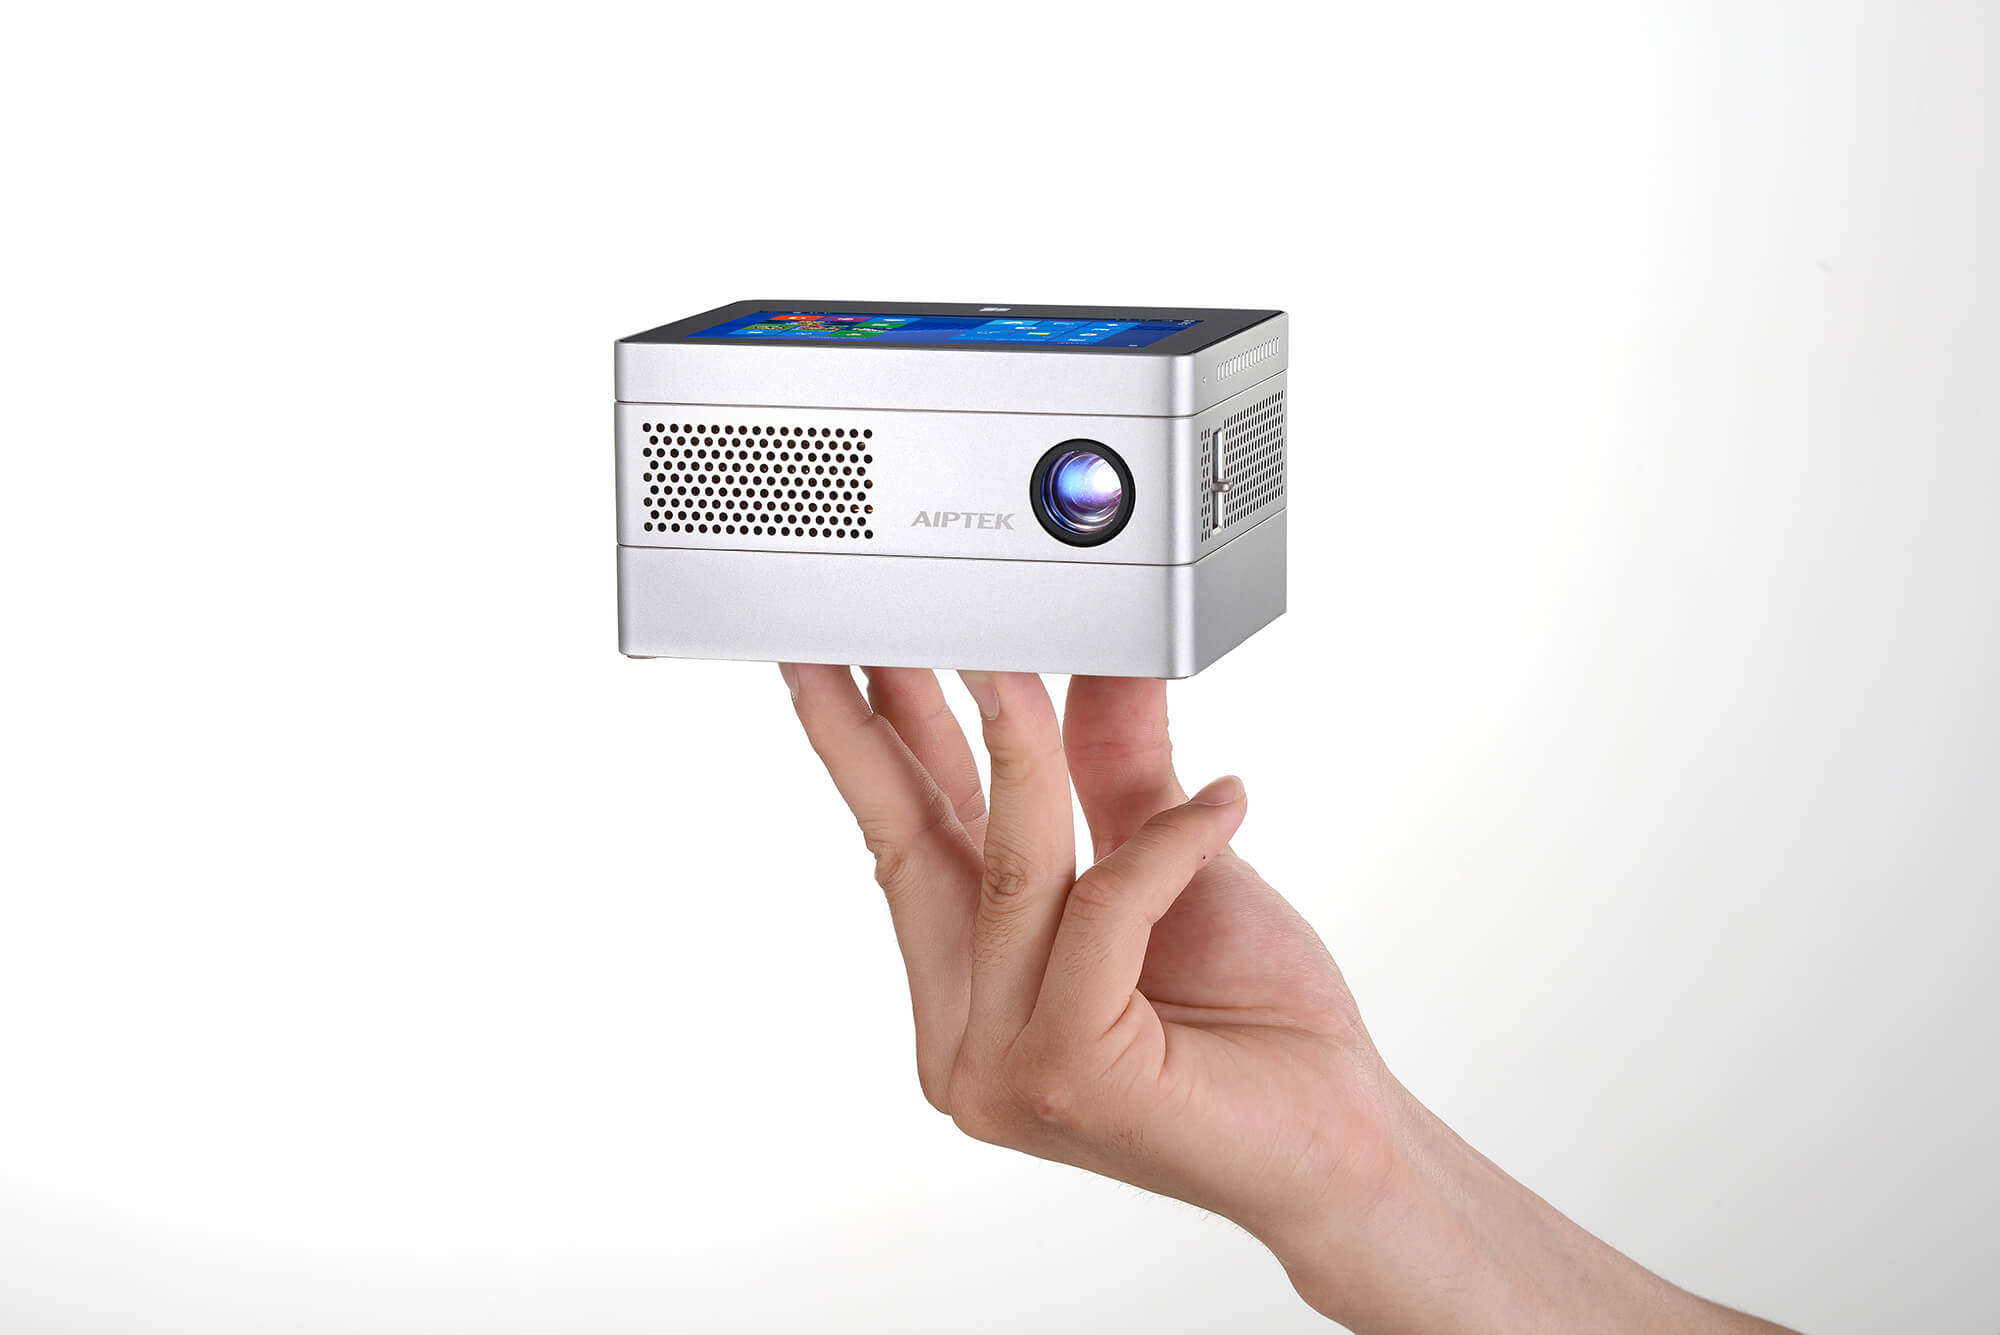 iBeamBLOCK Modular Computing Projector Dimensions are 4.9 x 3.7 x 2.5 inches and weight is 1.87 lbs